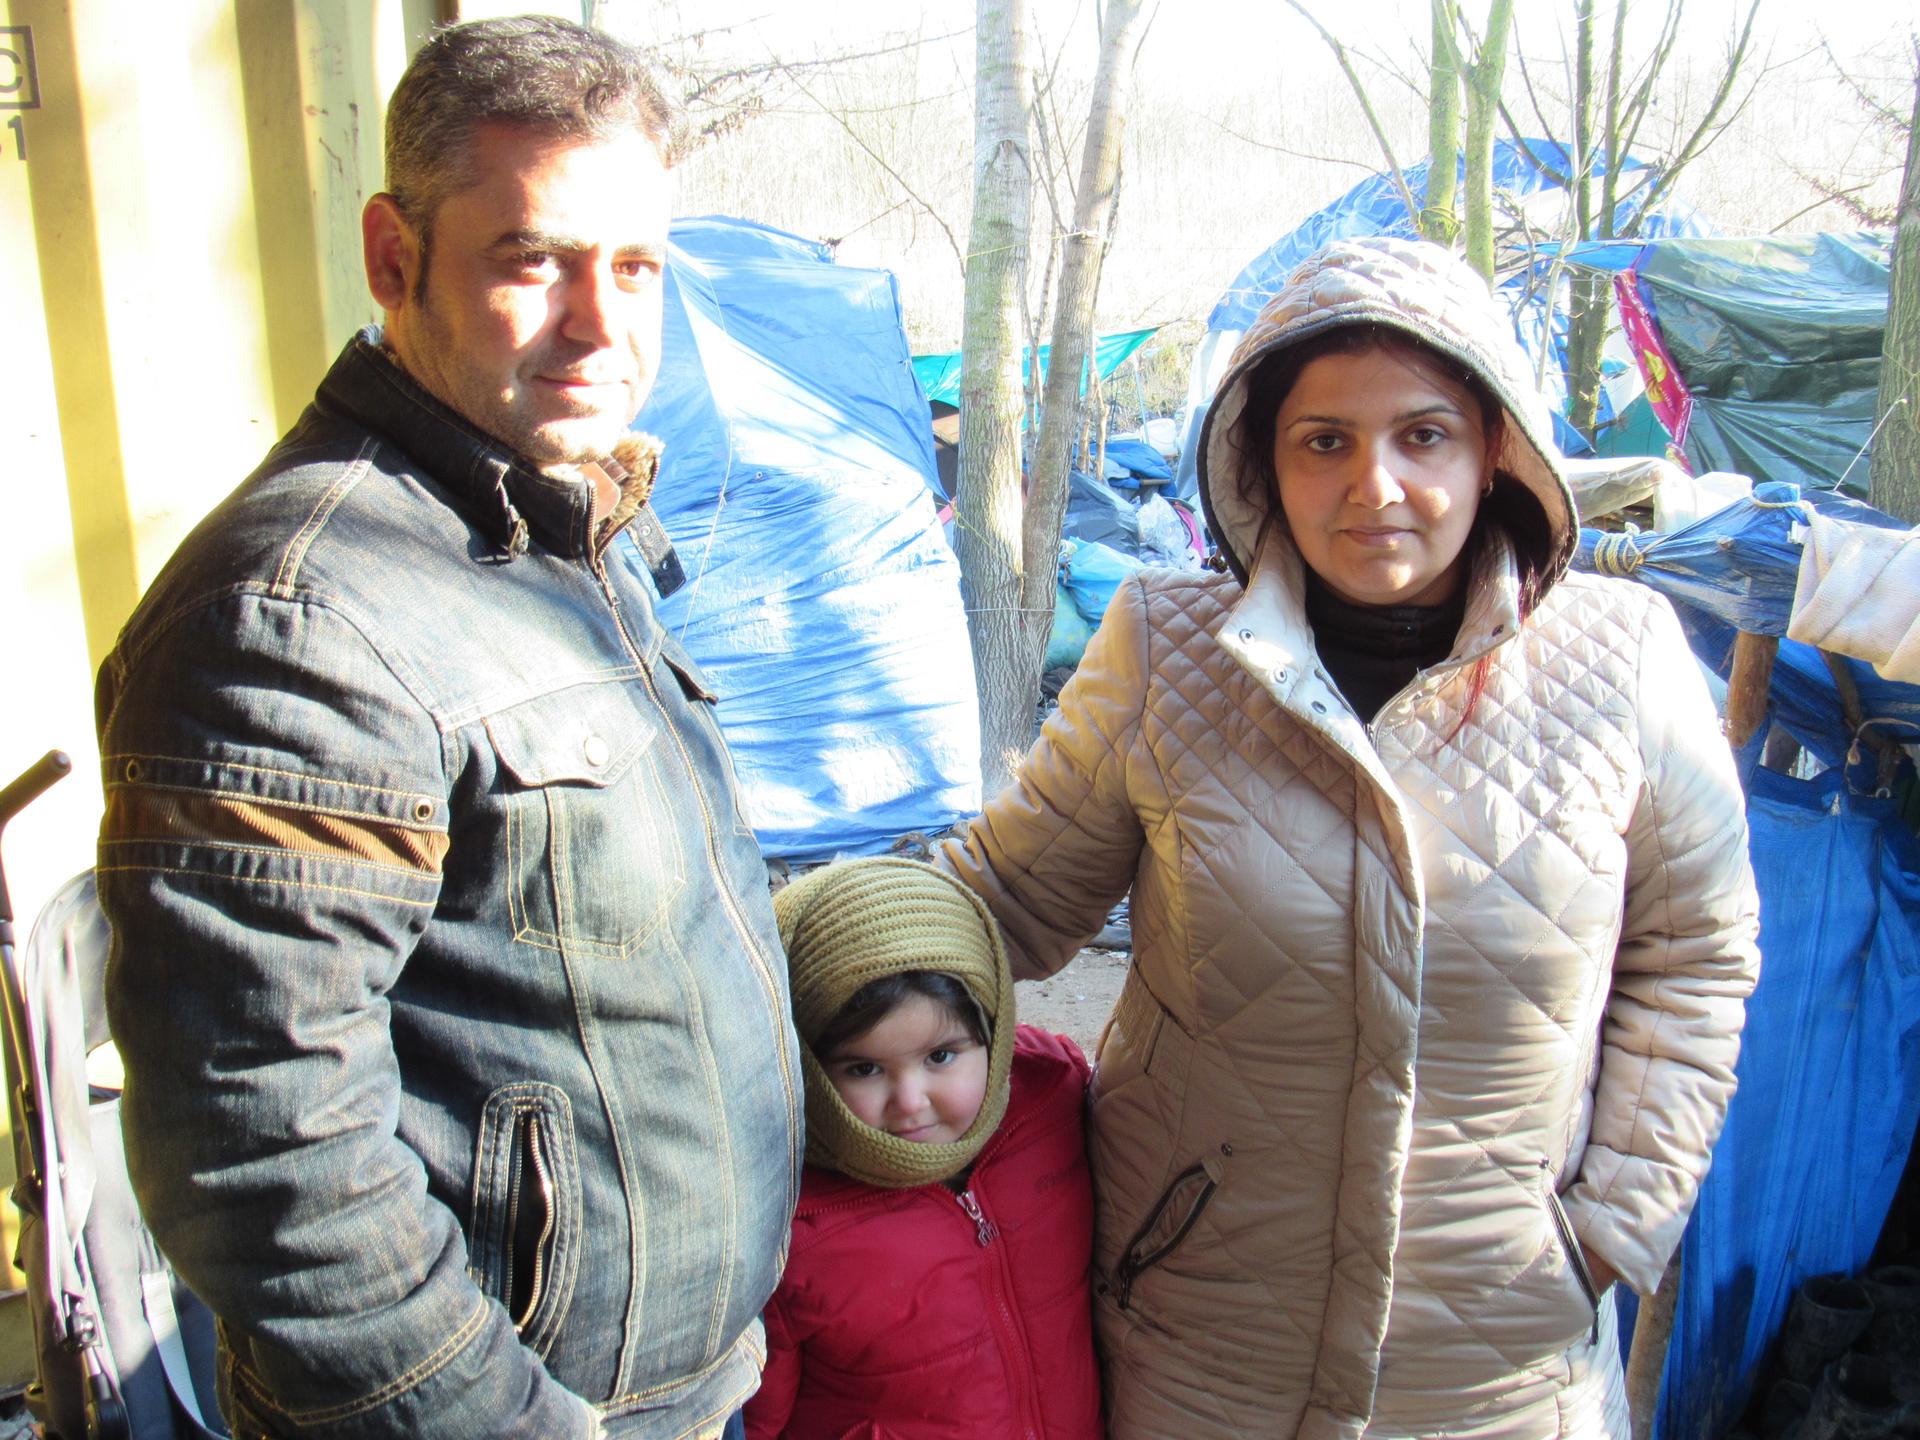 Hassan Dyar, his wife and daughter, just arrived at the camp. They are Iraqi Kurds from Sulaymaniyah